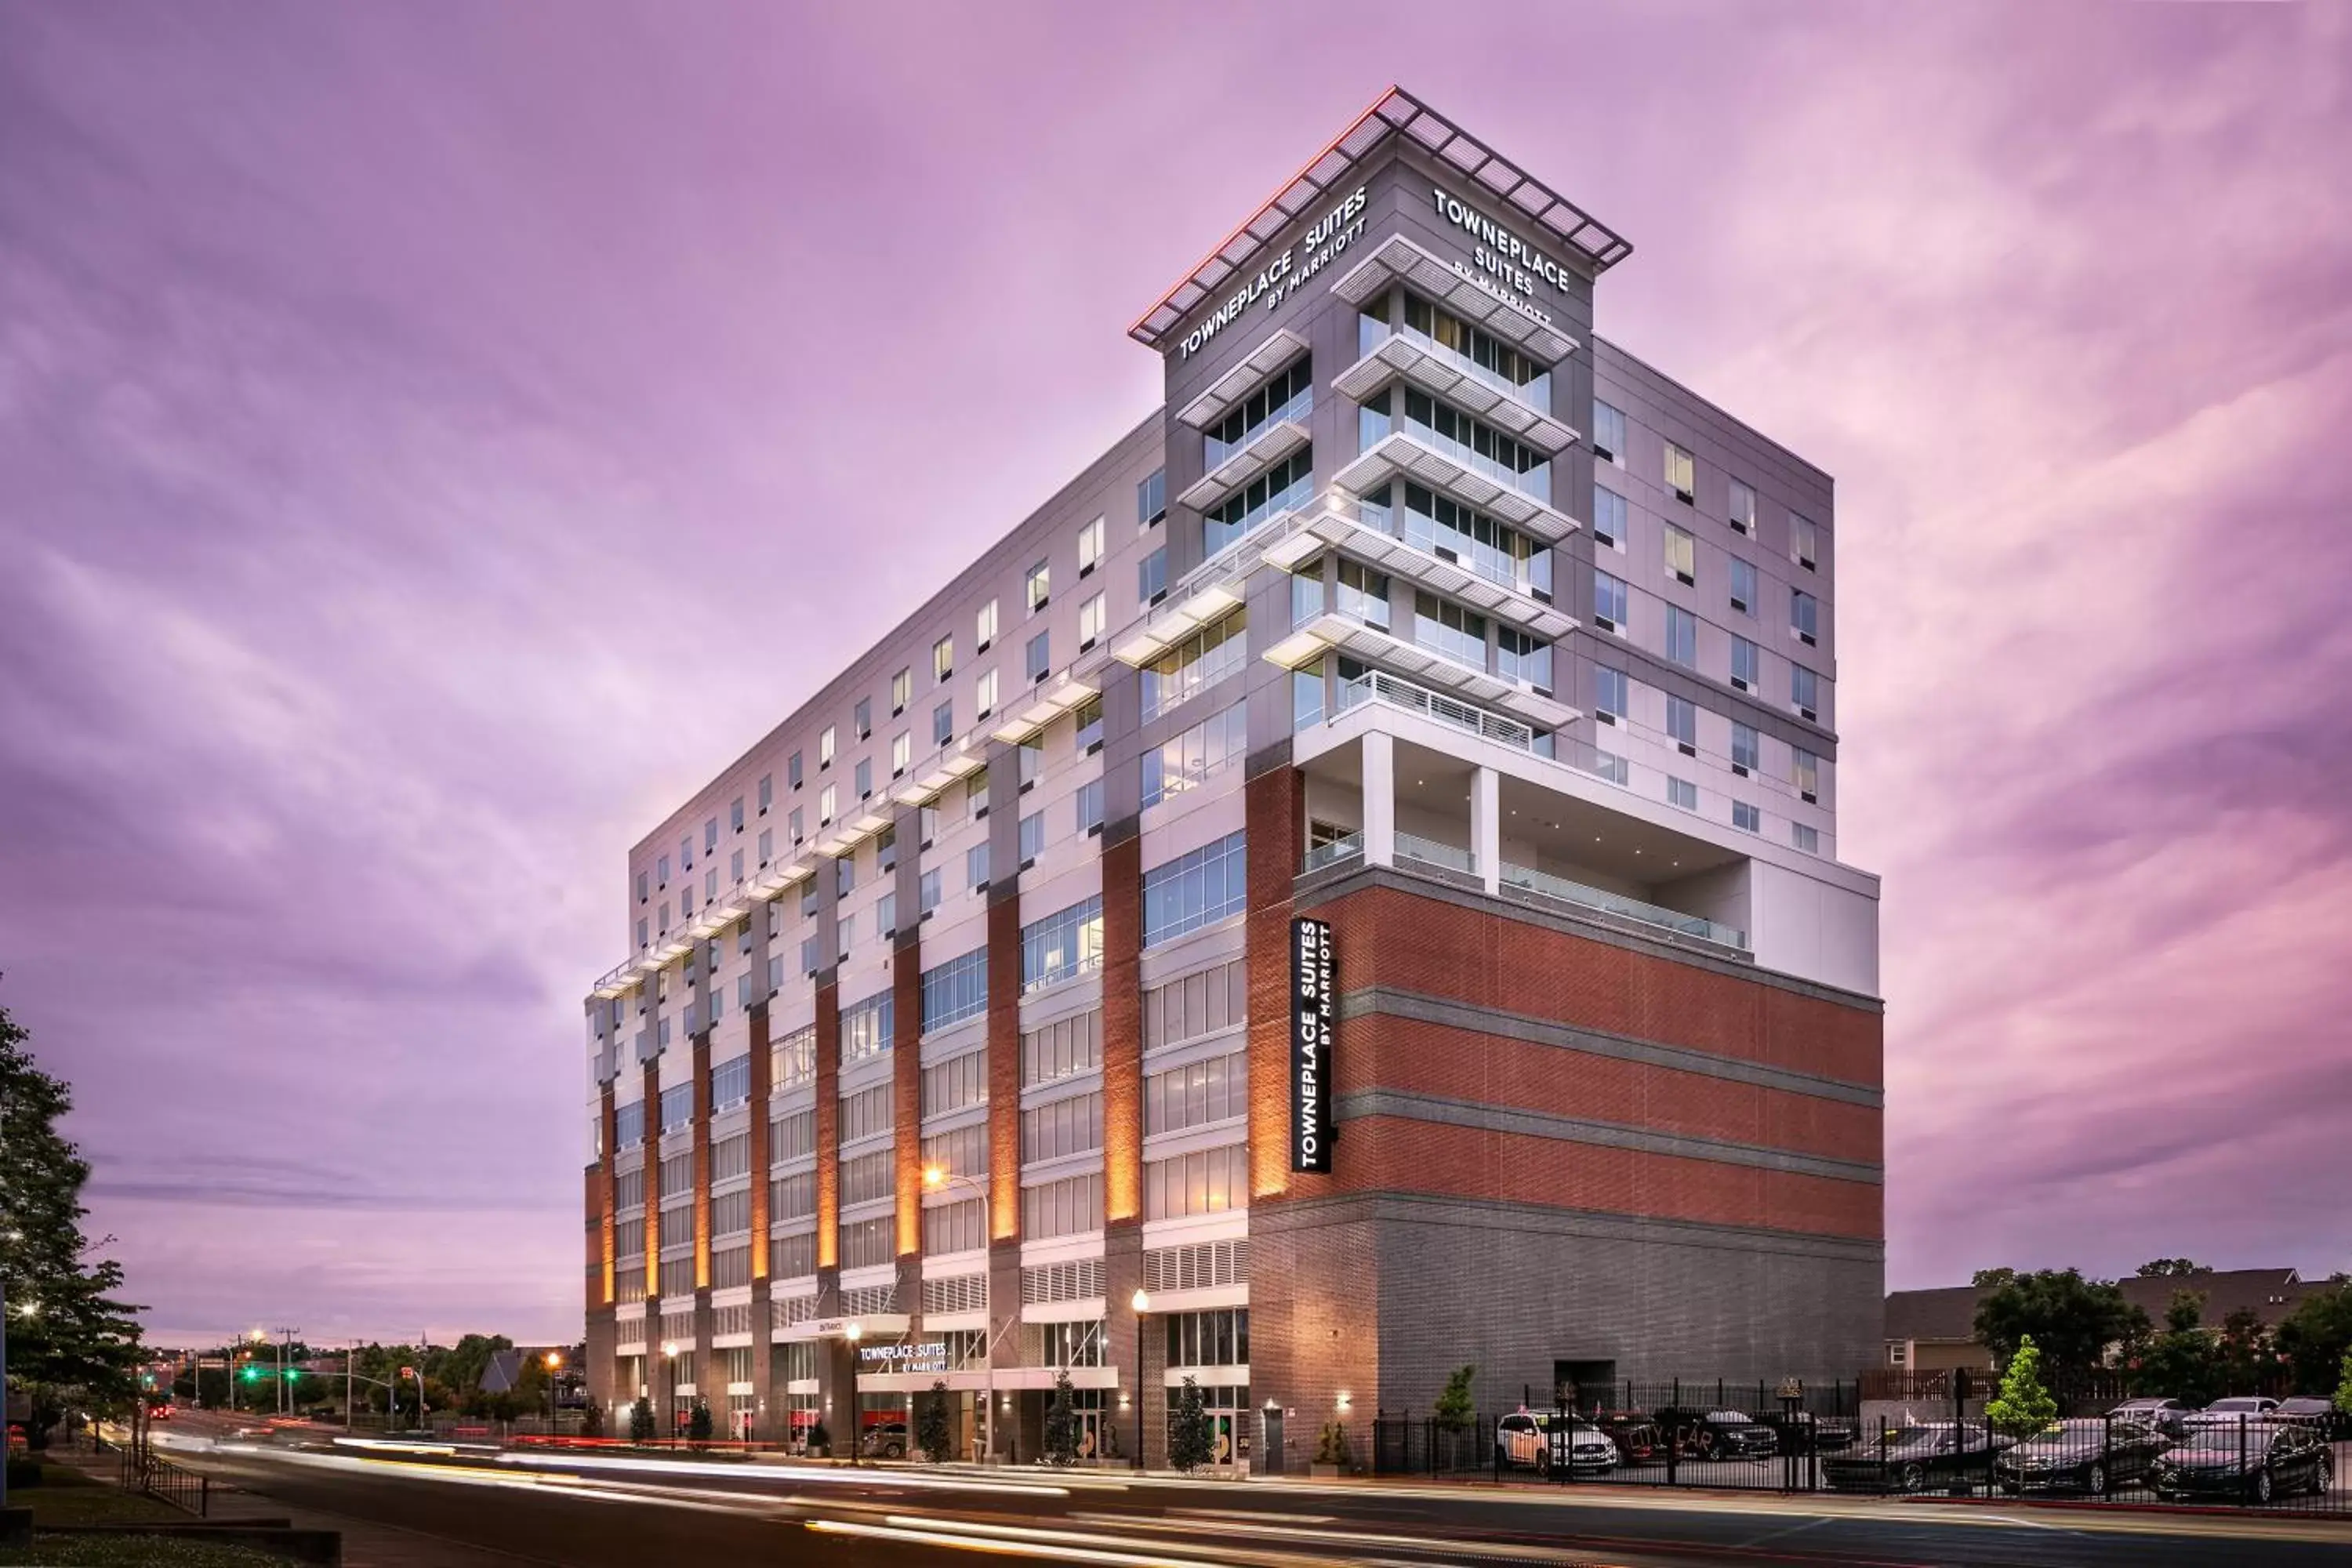 Property Building in TownePlace Suites by Marriott Nashville Midtown